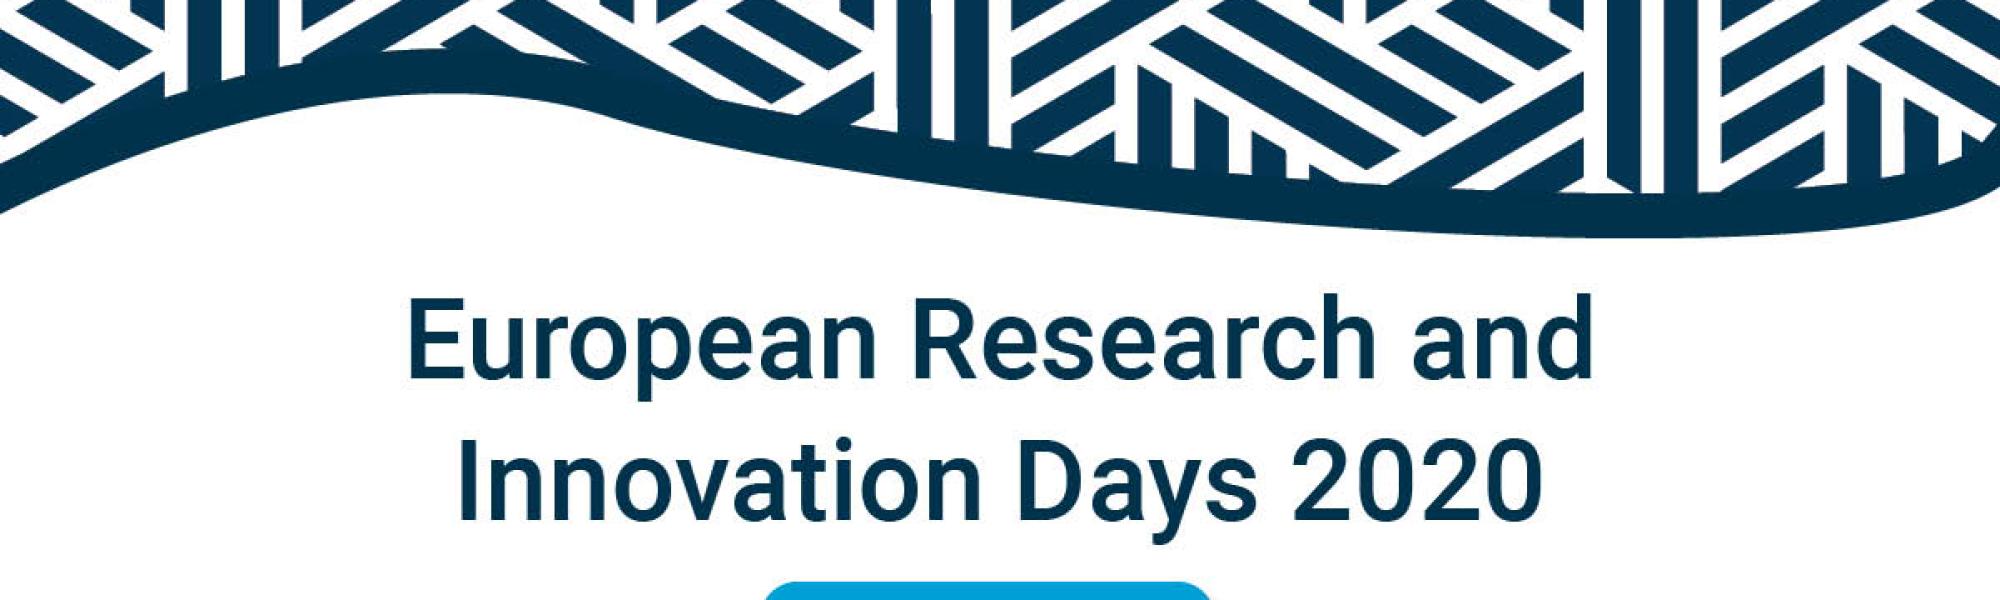 ASTP - European Research and Innovation Days 2020